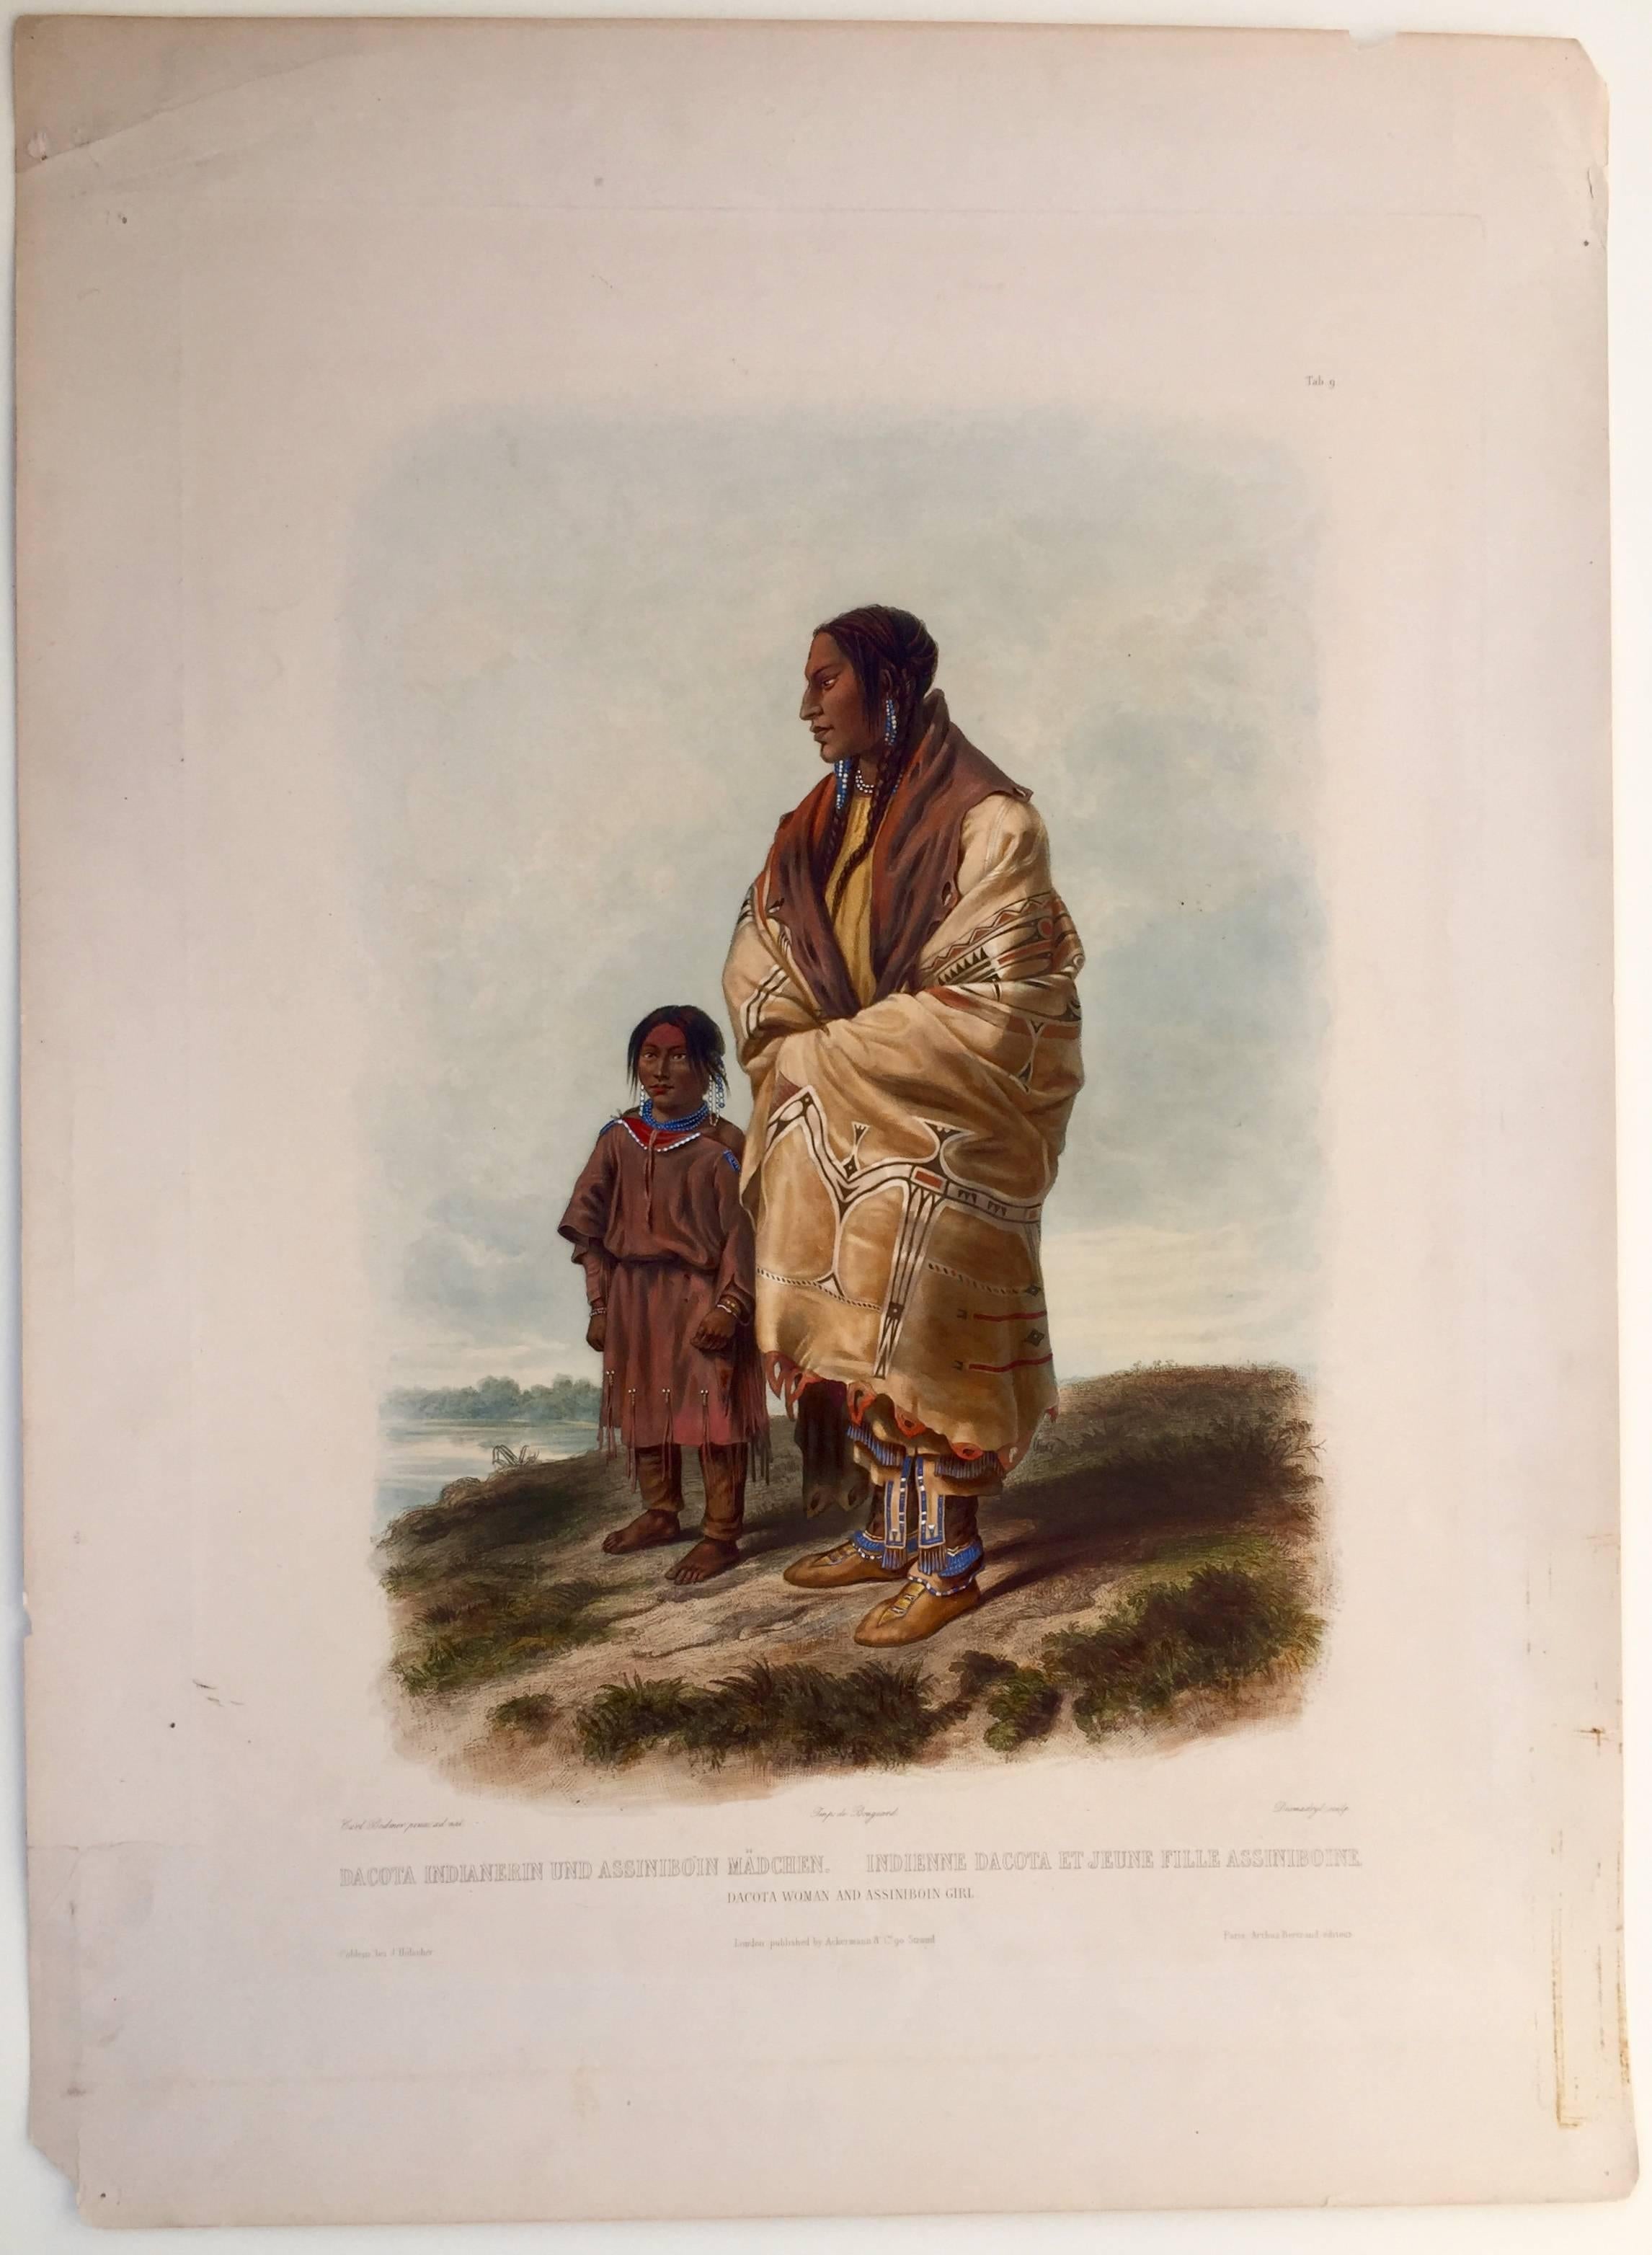 KARL BODMER (1809 - 1893)

DACOTAH WOMAN AND ASSINIBOIN GIRL, ca 1839
Engraving and aquatint, plate 9 from - Travels in the Interiors of North America, -- Paris and Coblenz, 1839-43 by Ackerman and Co. London. With the Bodmer blind stamp lower